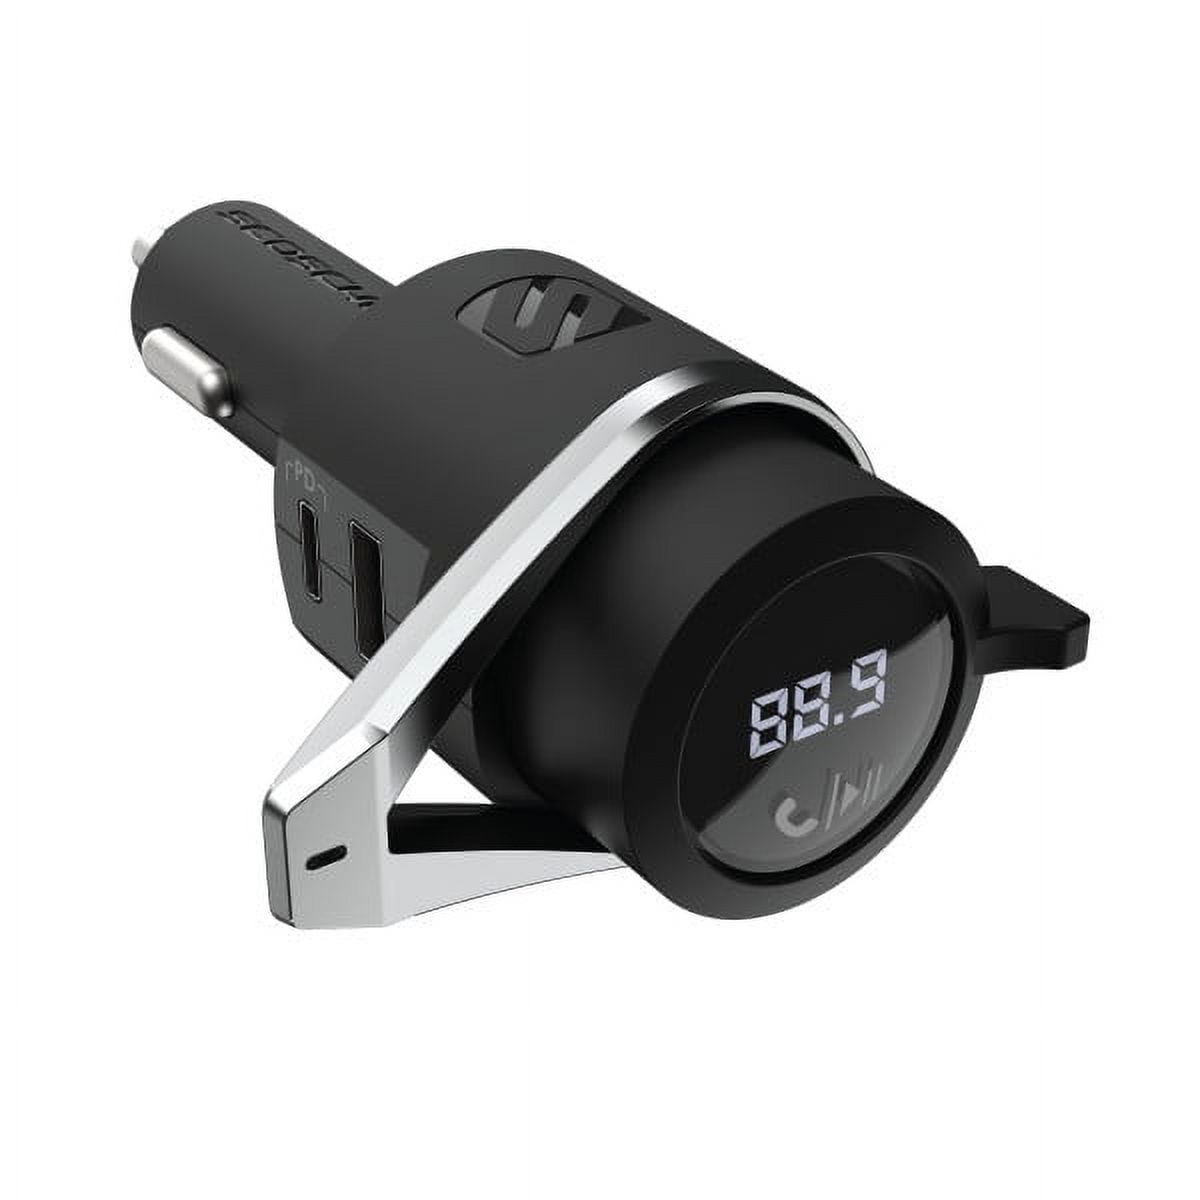 Bluetooth usb 5.0 multifunctional fm transmitter 8in1, CATEGORIES \  Automotive \ Transmitters